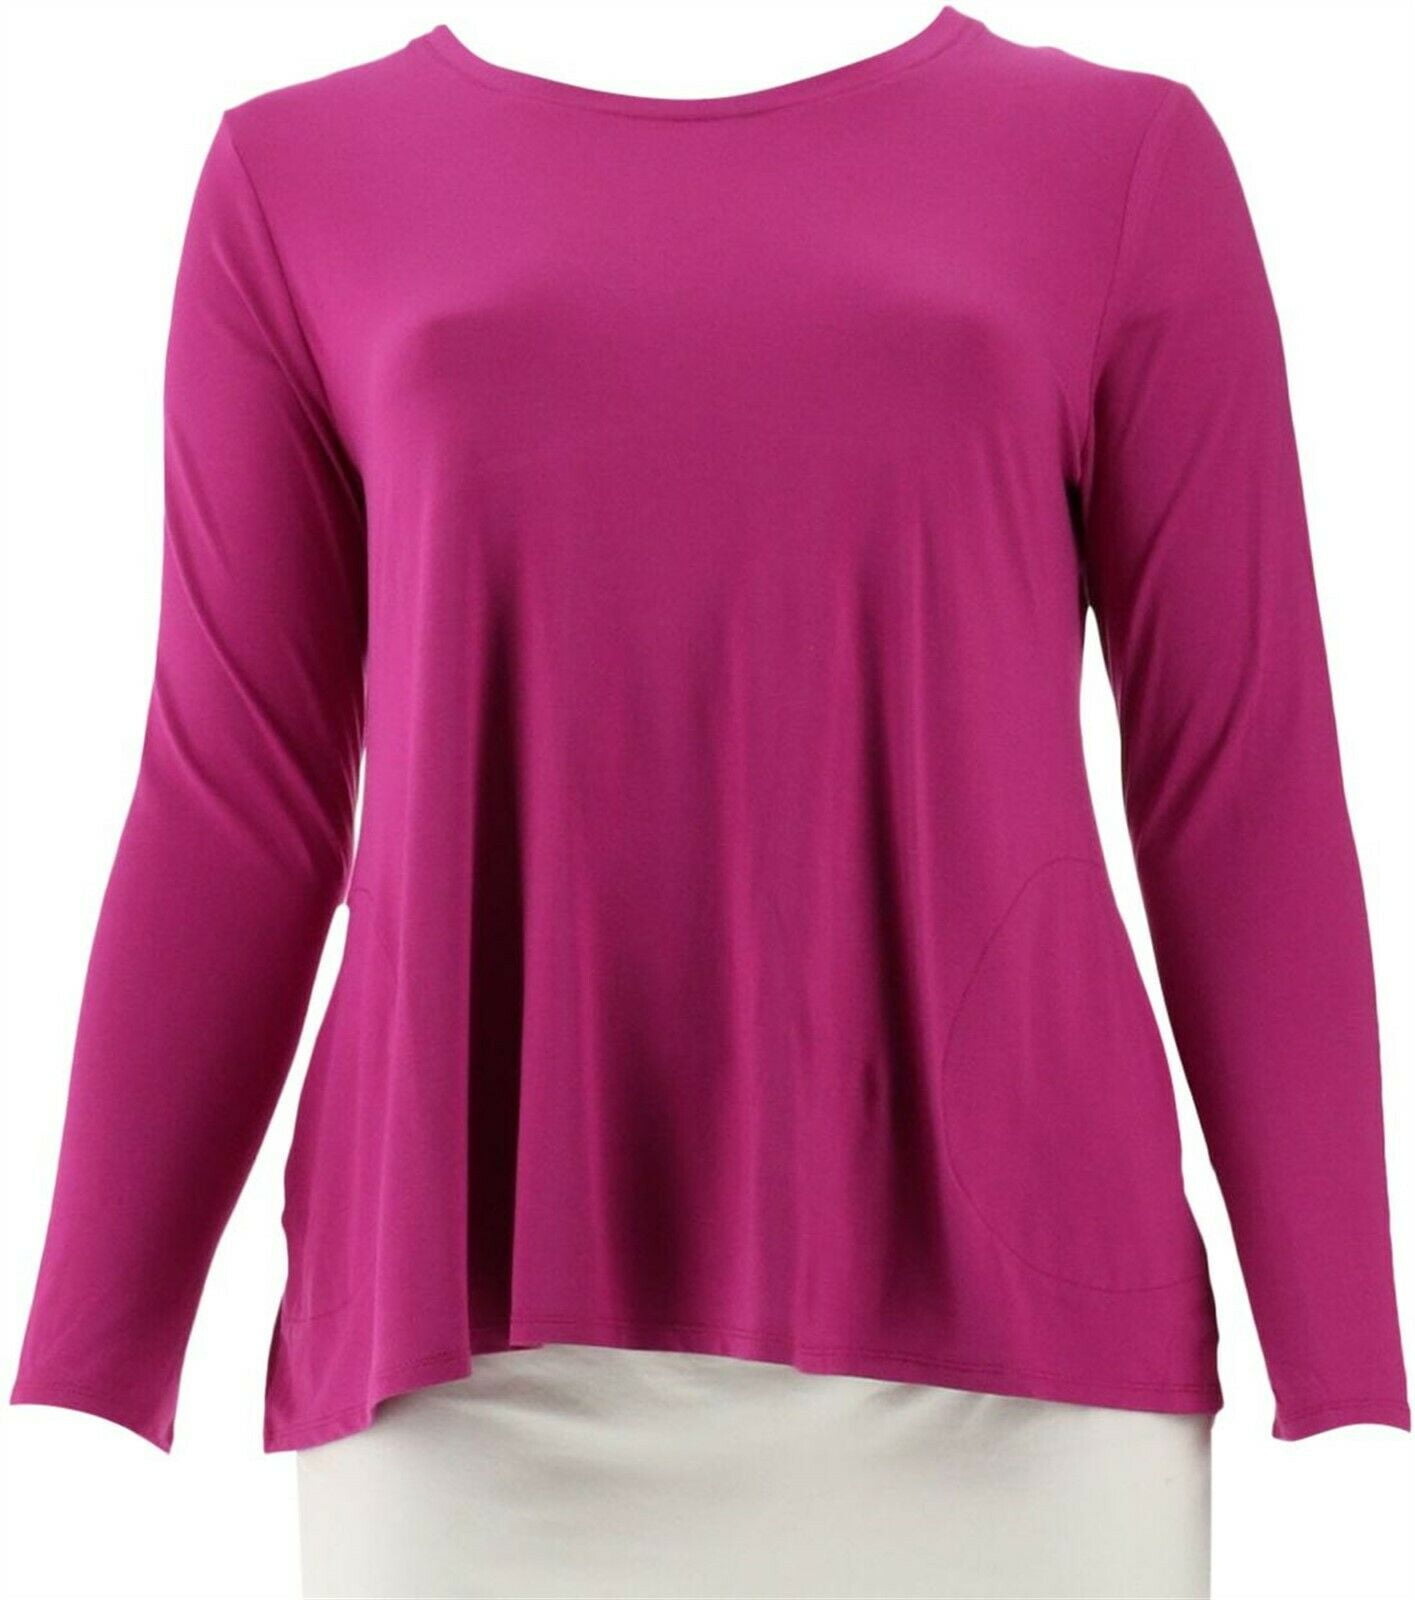 Attitudes by Renee - Attitudes Renee Weekend Chic Rayon from Bamboo Top ...